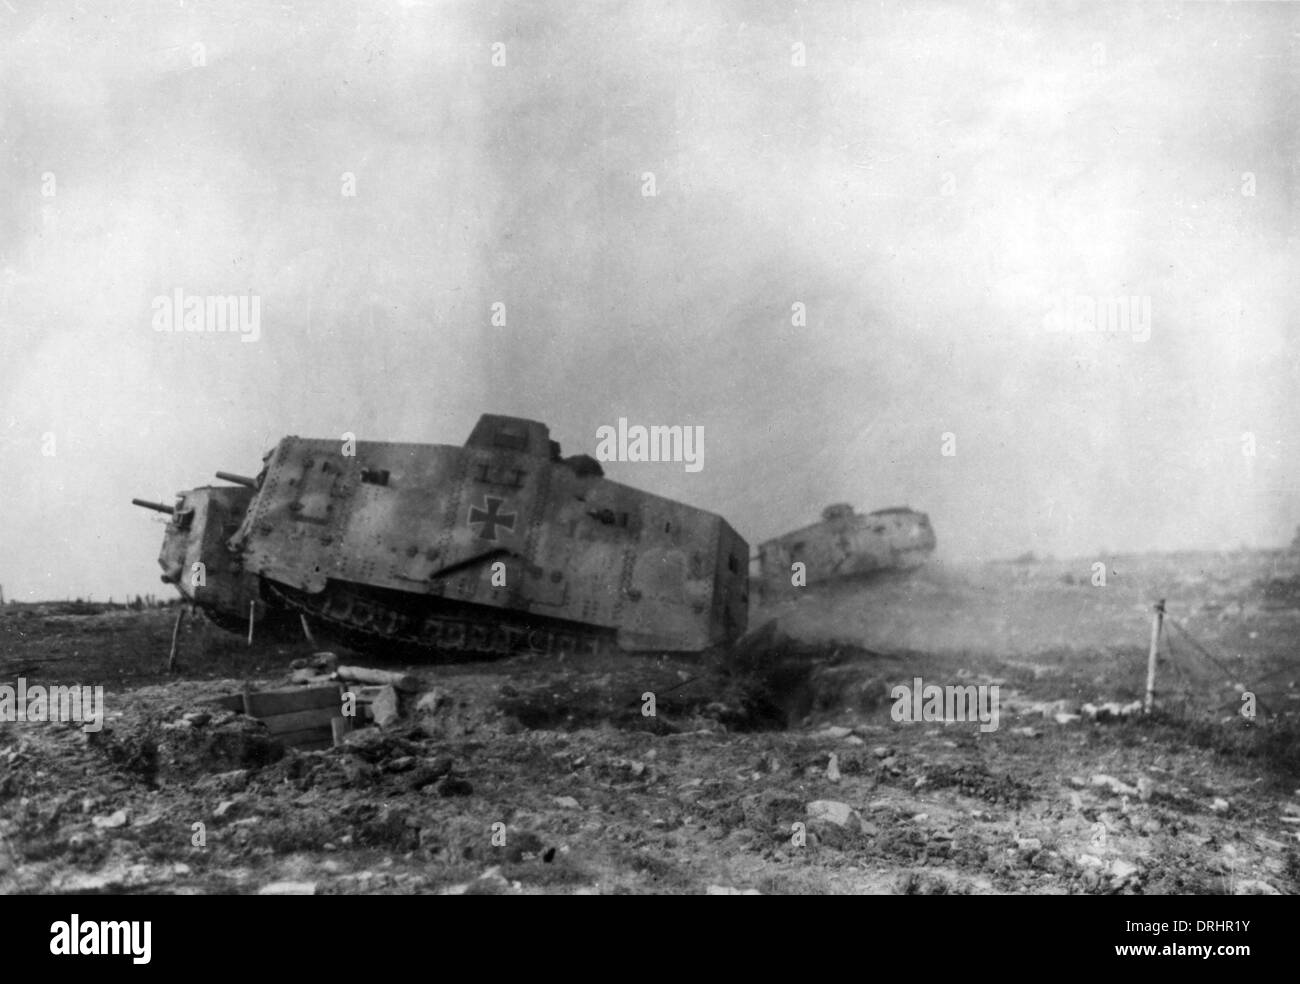 German tanks attacking Allied trench positions, WW1 Stock Photo